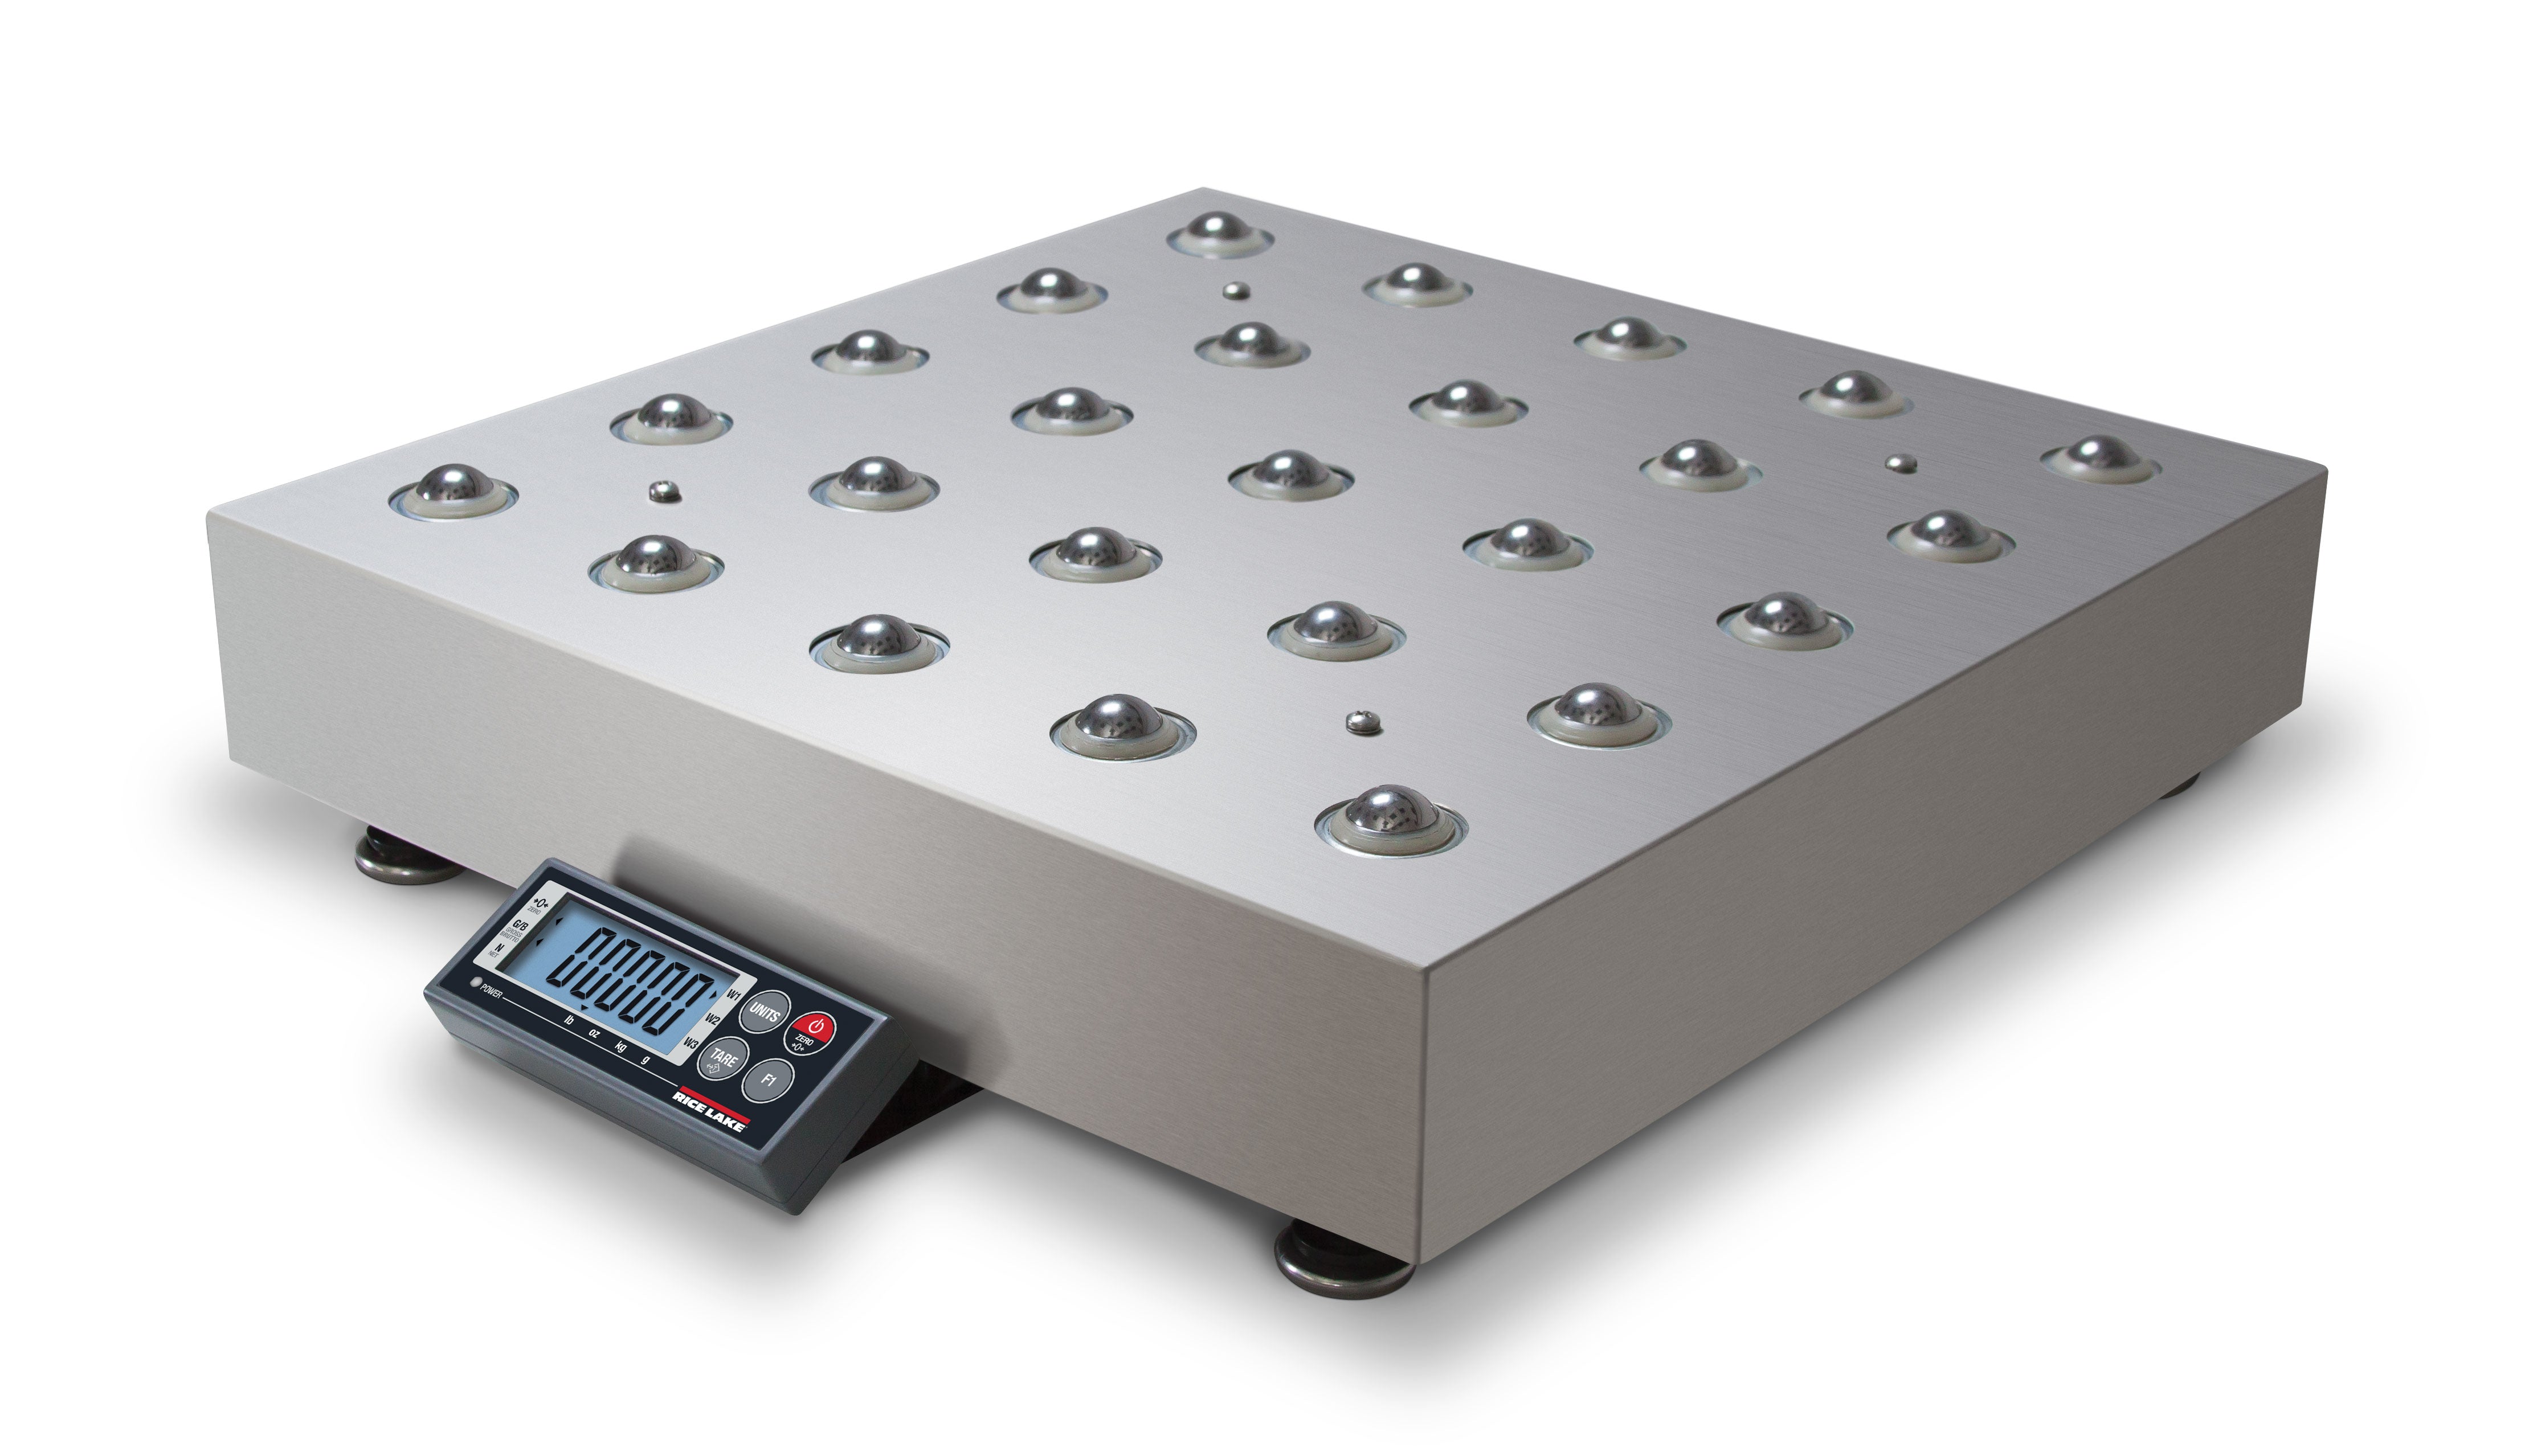 Rice Lake 182401 300 x 0.1 lb/150 x 0.05kg, BP 2424-150S Shipping Digital Scale, Ball Top with 2 years Warranty